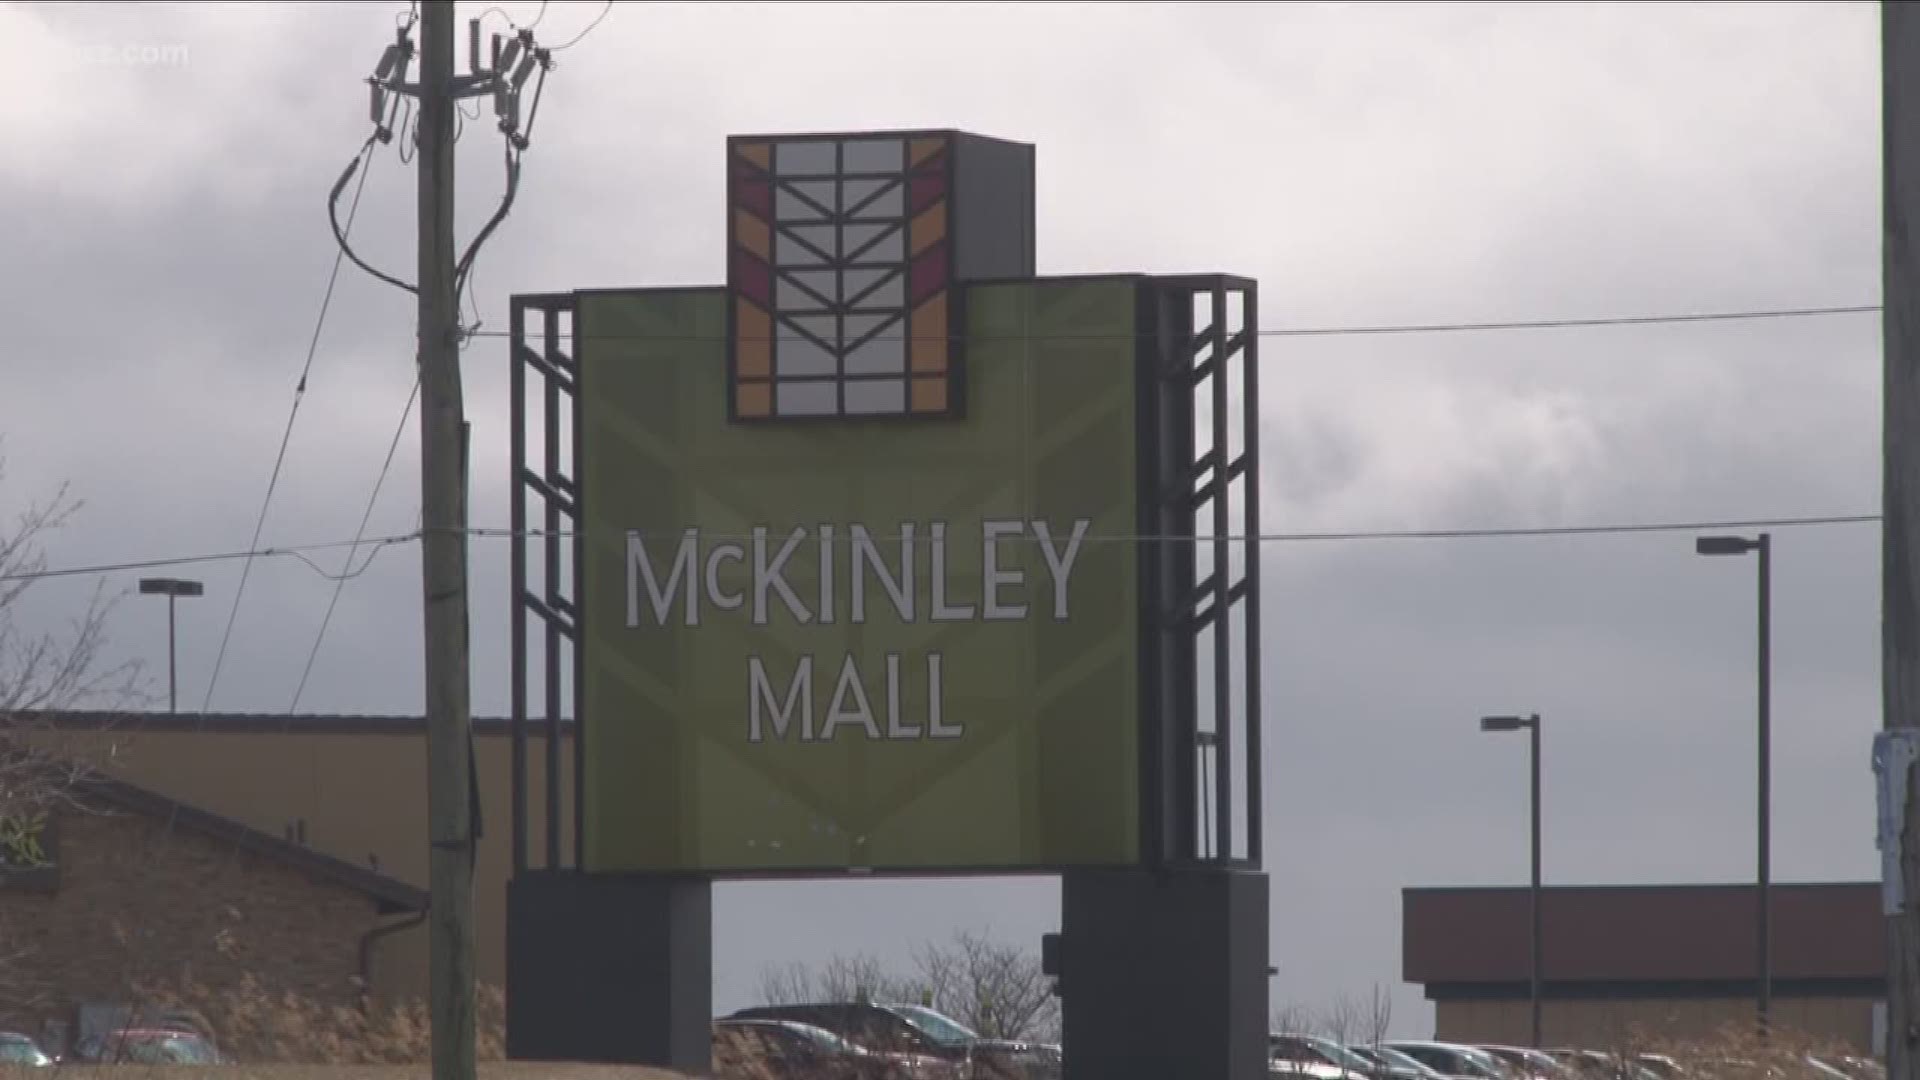 Sports Complex Plan In Mix To save Mall?